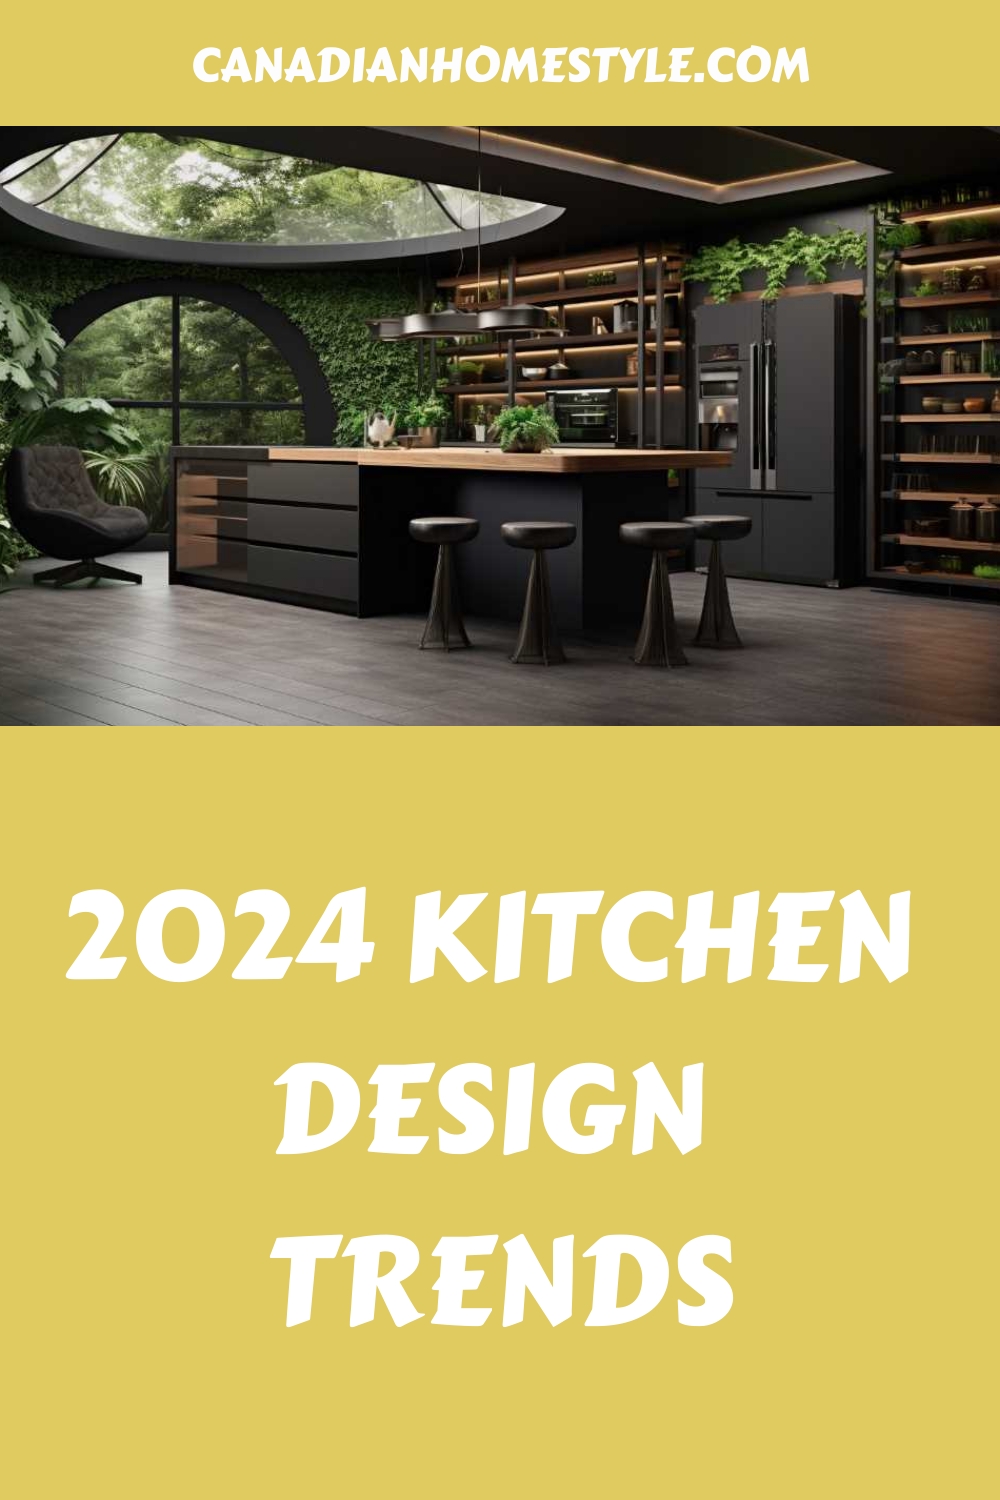 2024 Kitchen Design Trends - Canadian Home Style